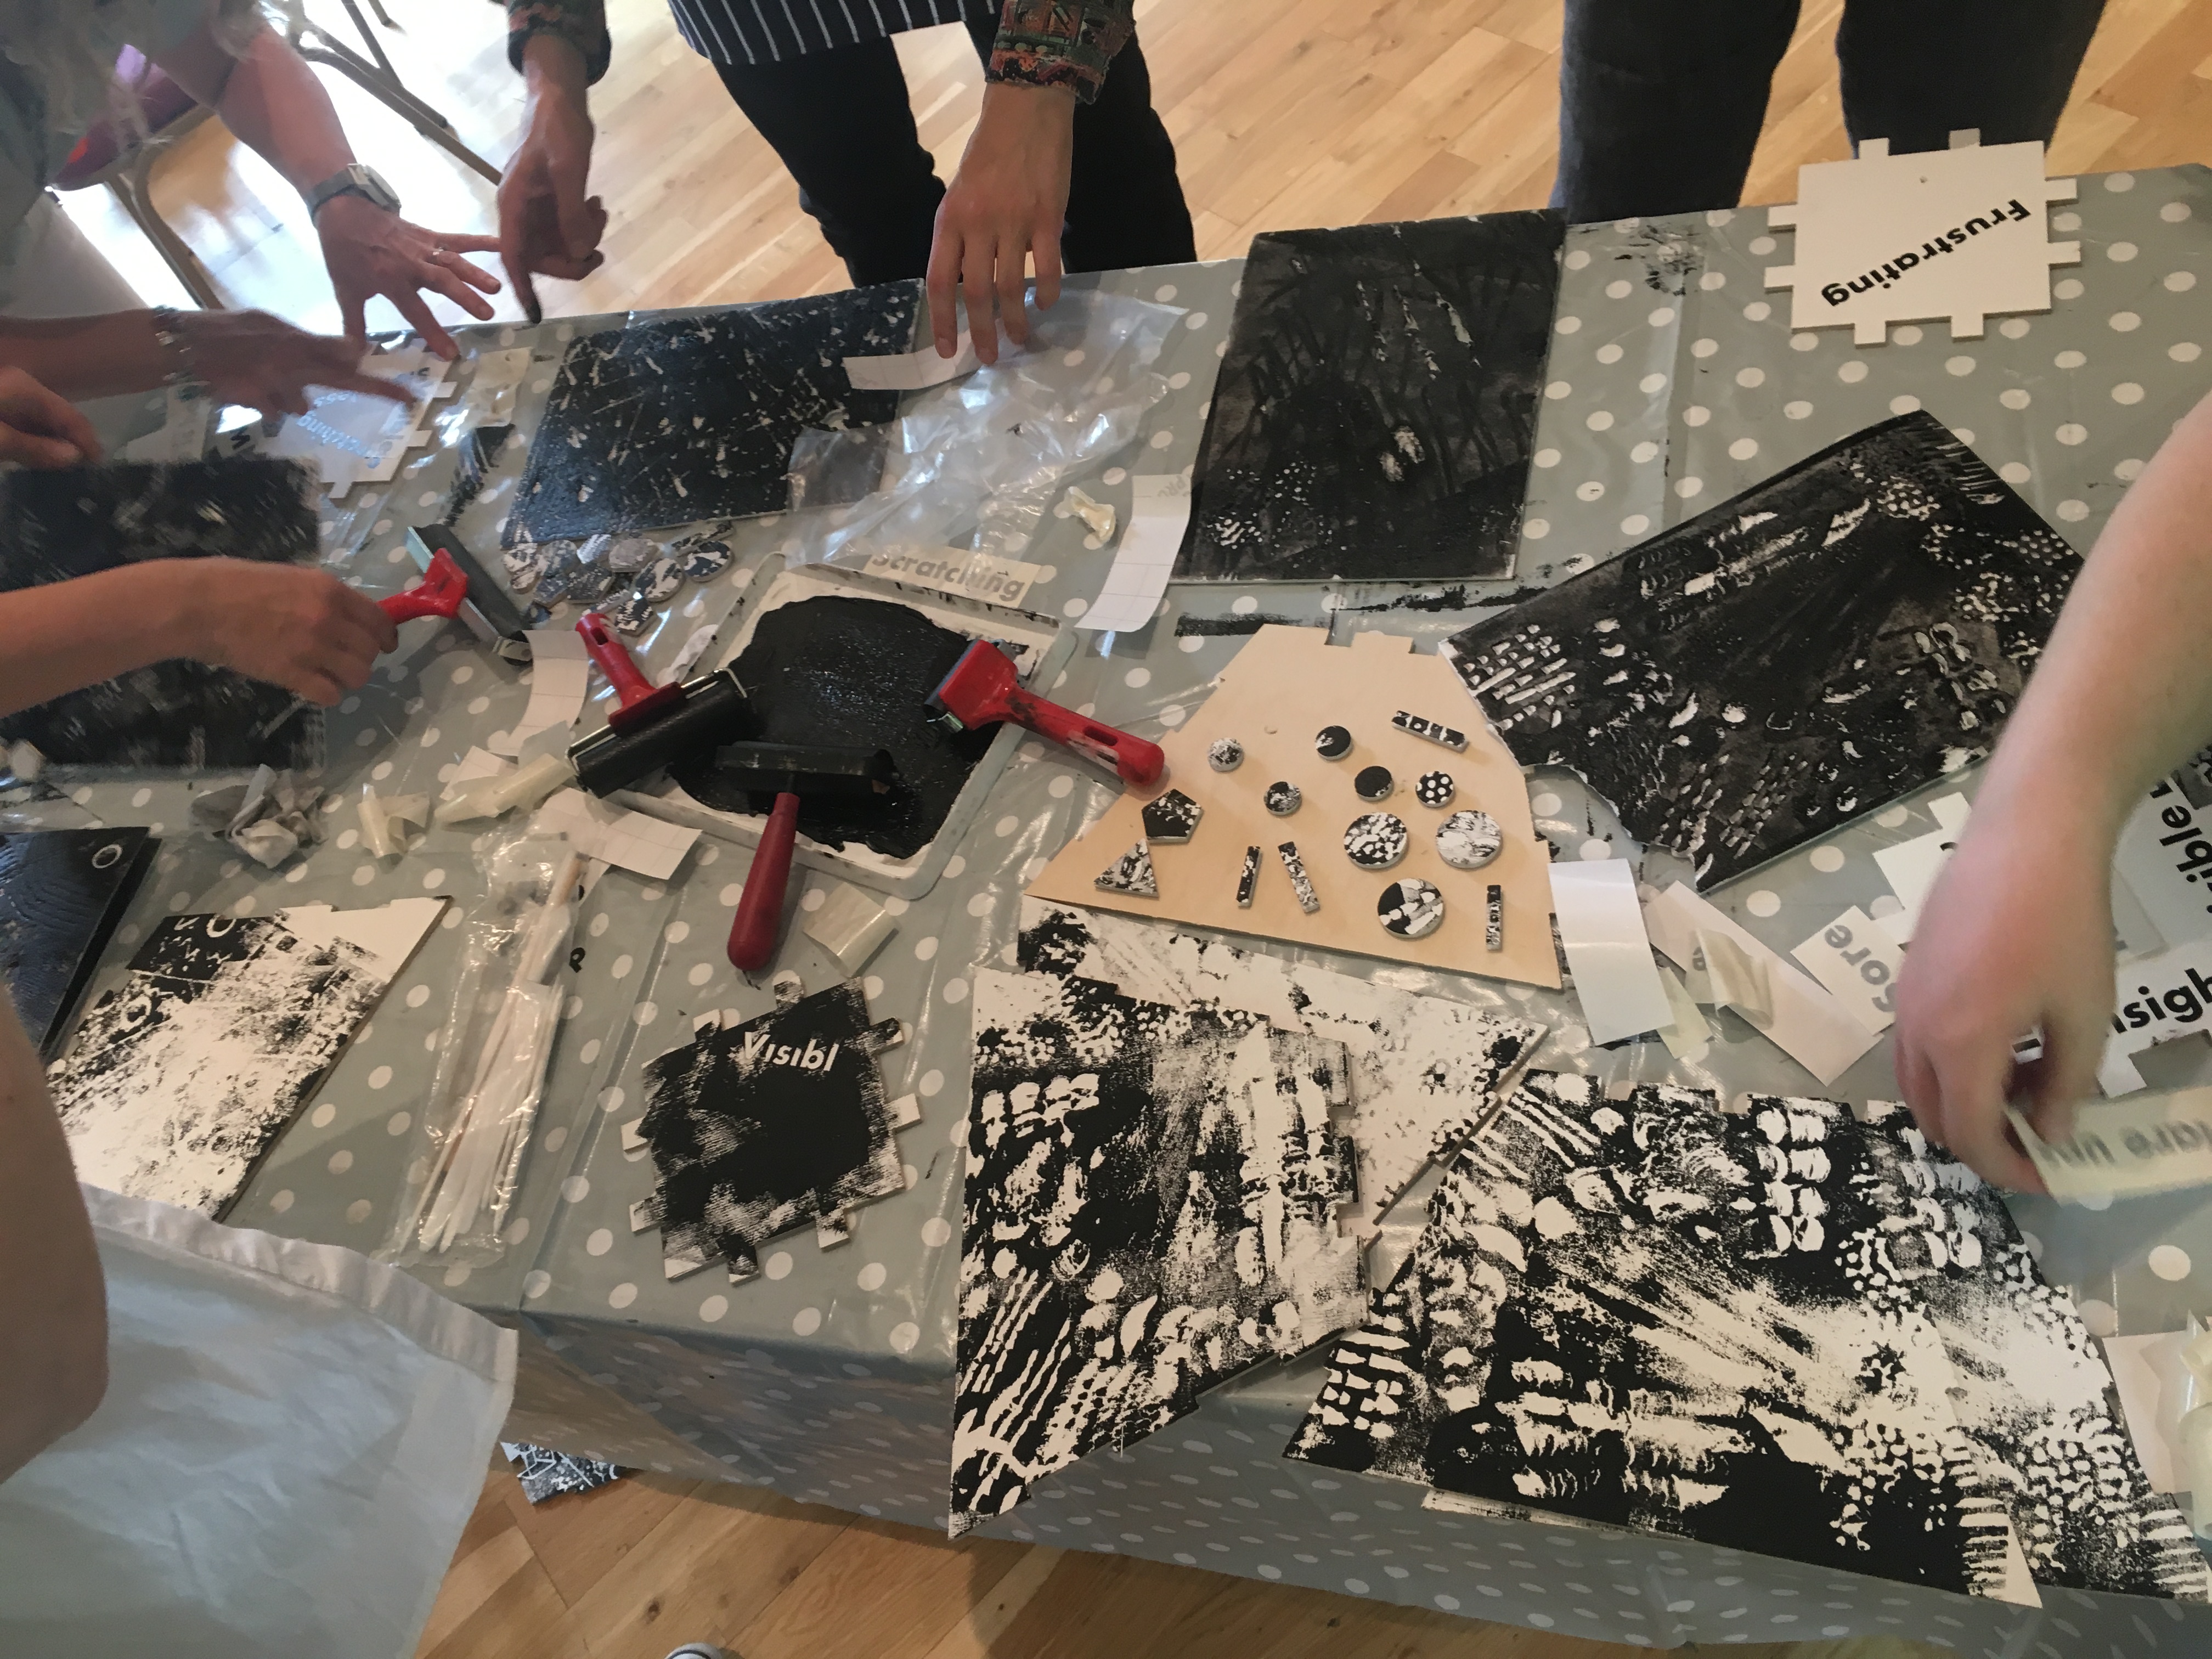 Workshop participants are gathered around a table. Their hands are visible and they are printmaking, transferring pattern from Styrofoam on to wooden panels.